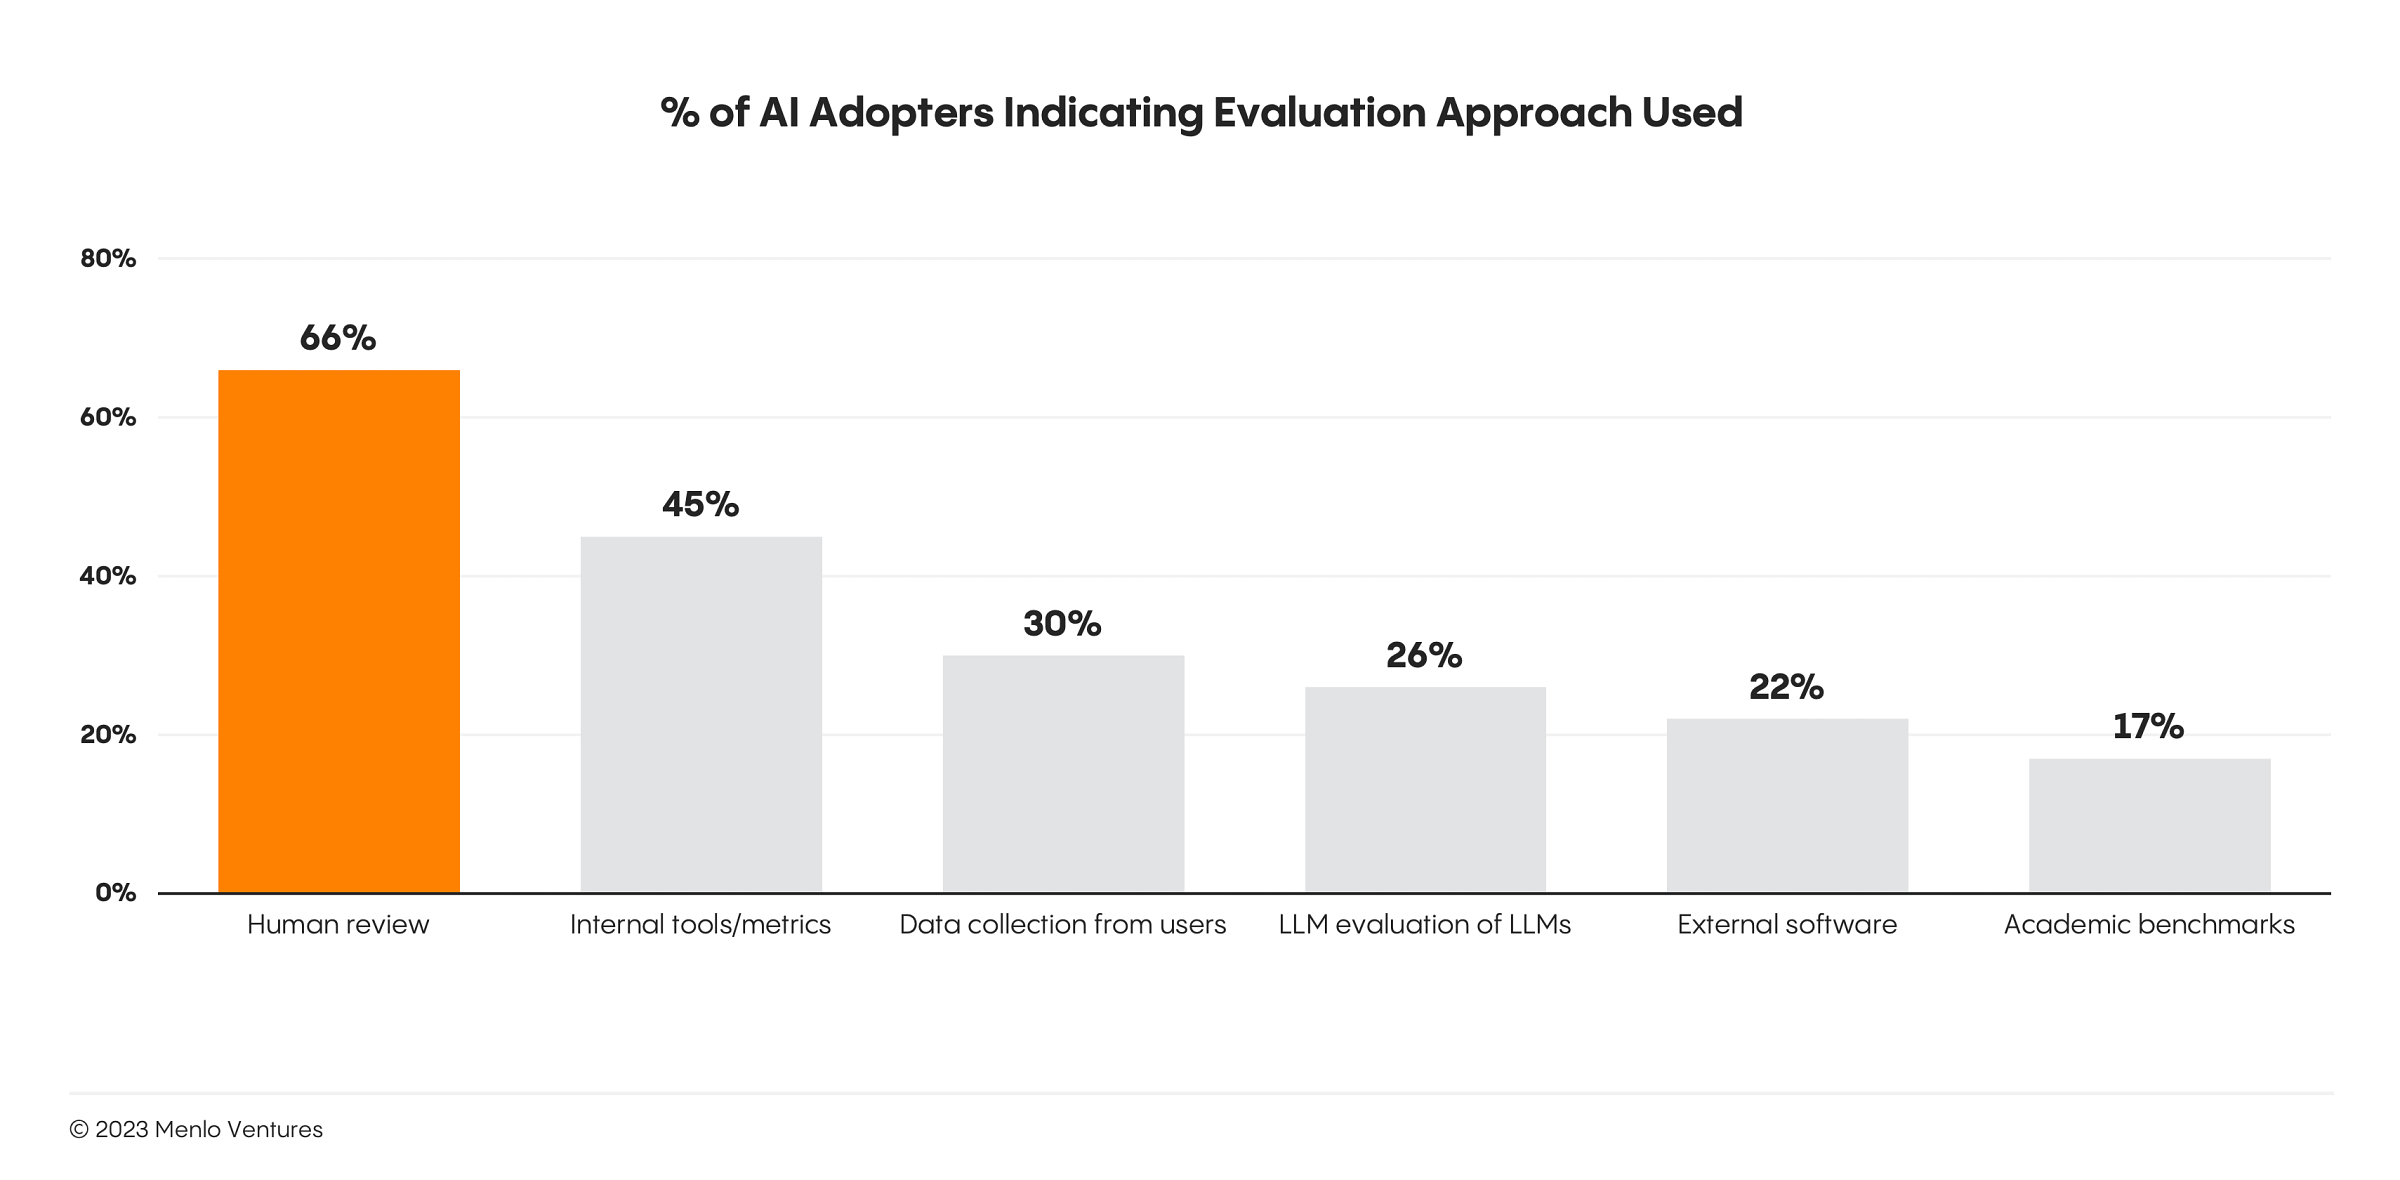 Graph showing % of AI adopters indicating evaluation approach used